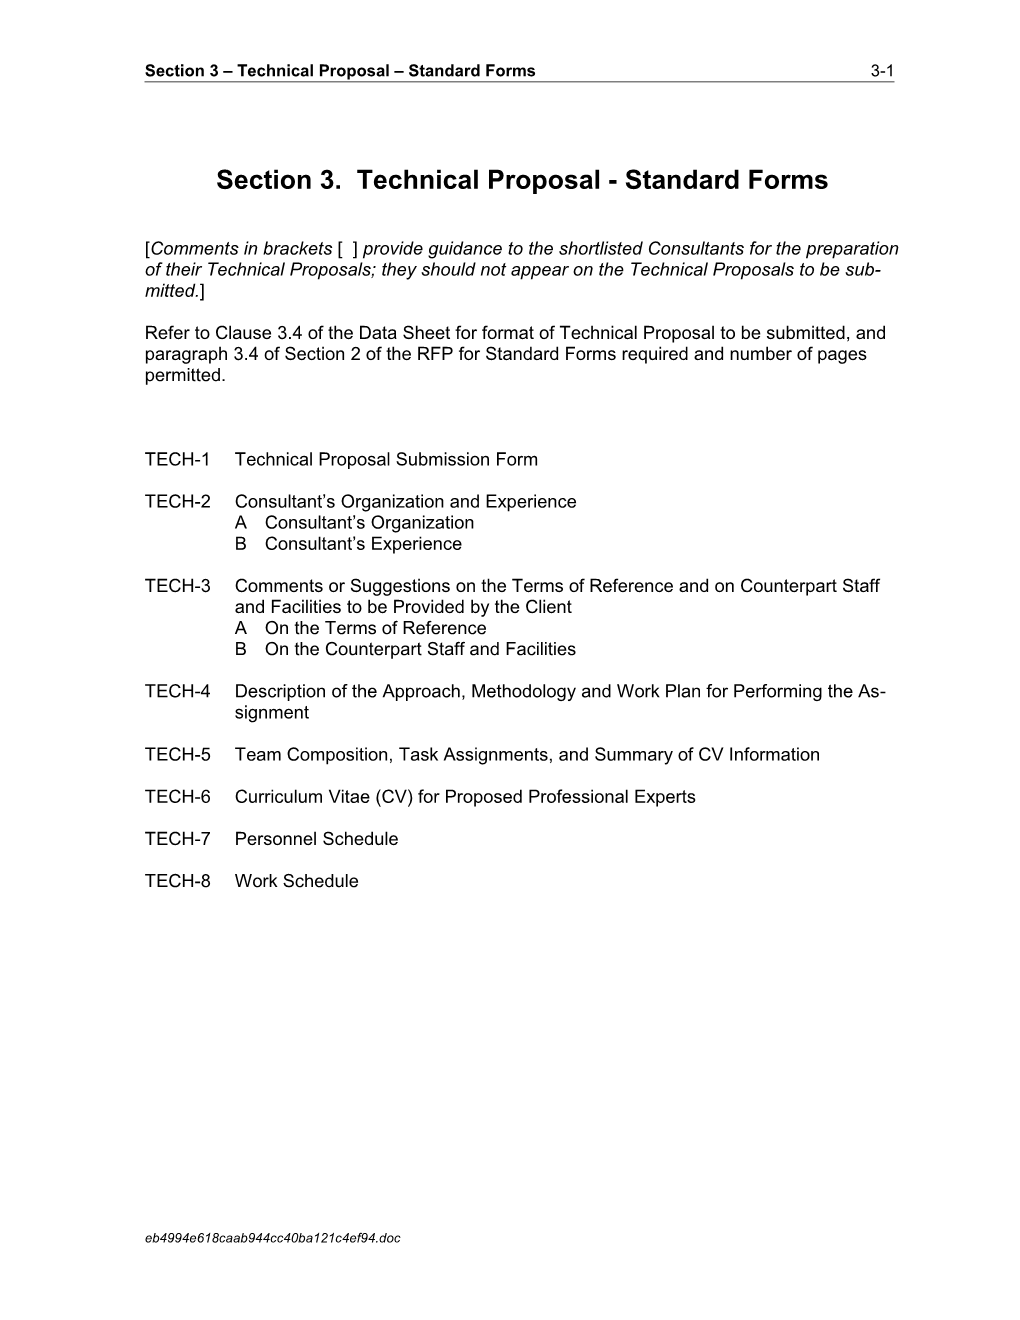 Section 3. Technical Proposal - Standard Forms